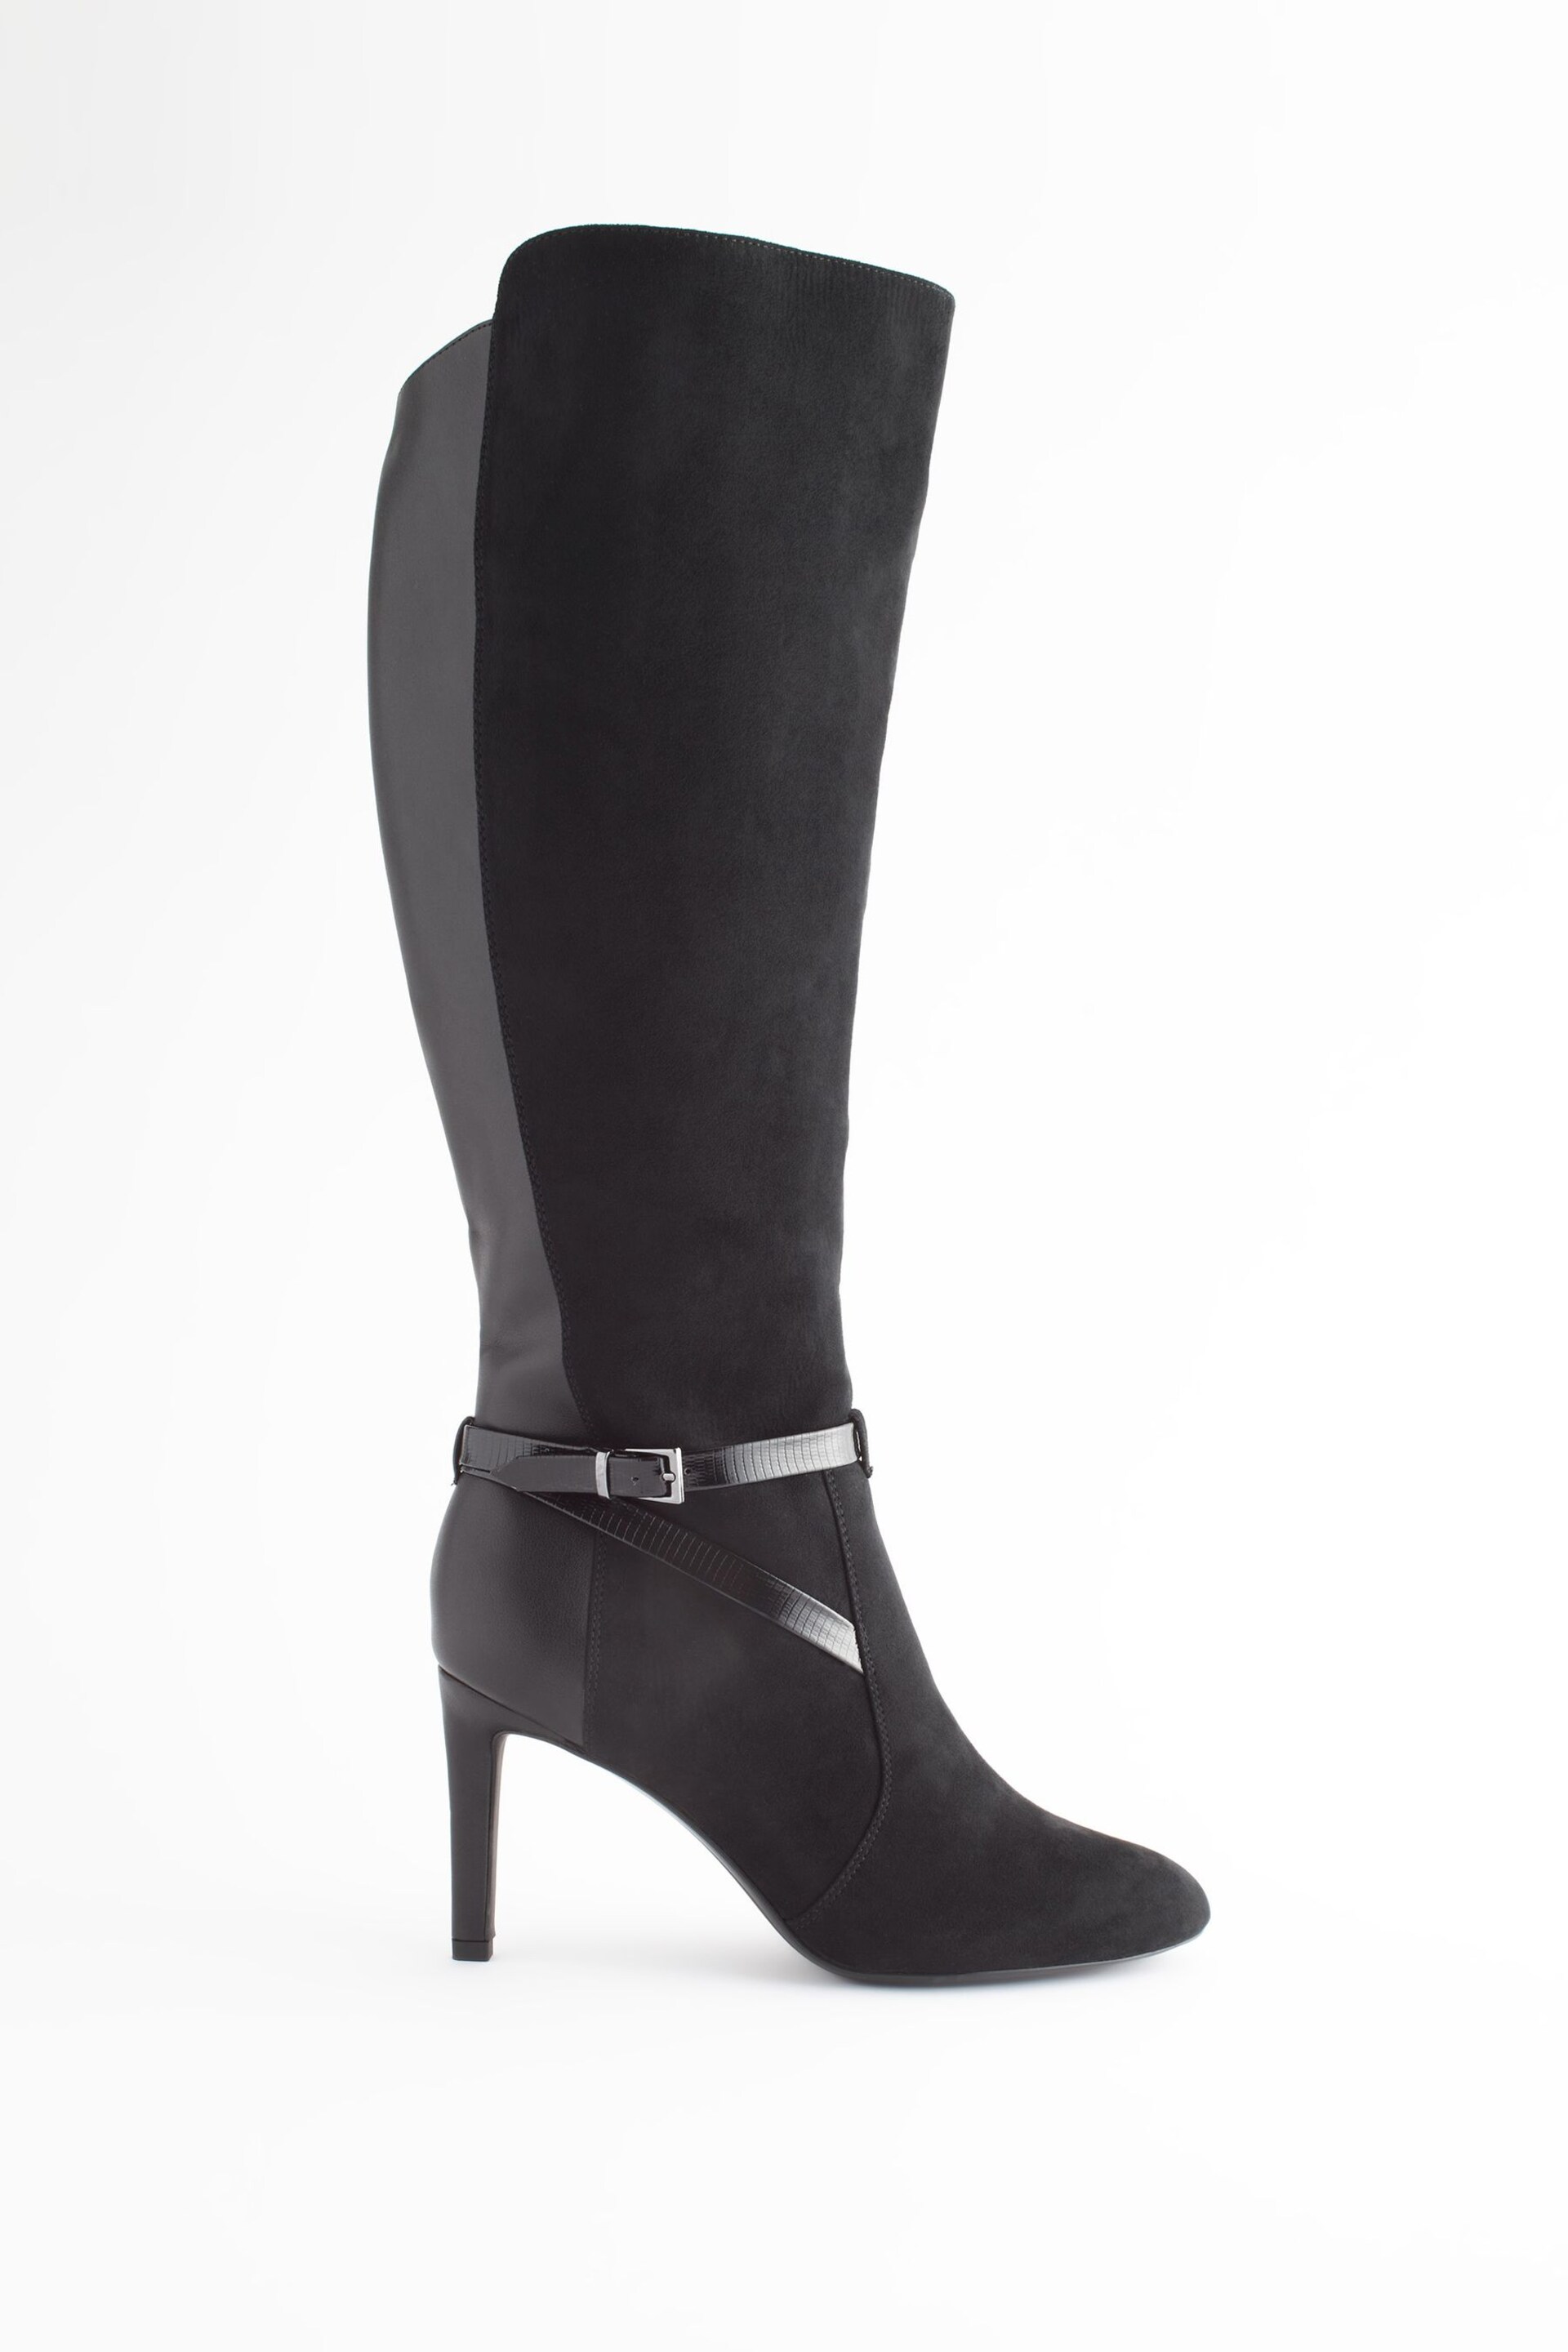 Black Extra Wide Fit Forever Comfort® Buckle Detail Heeled Knee High Boots - Image 2 of 6